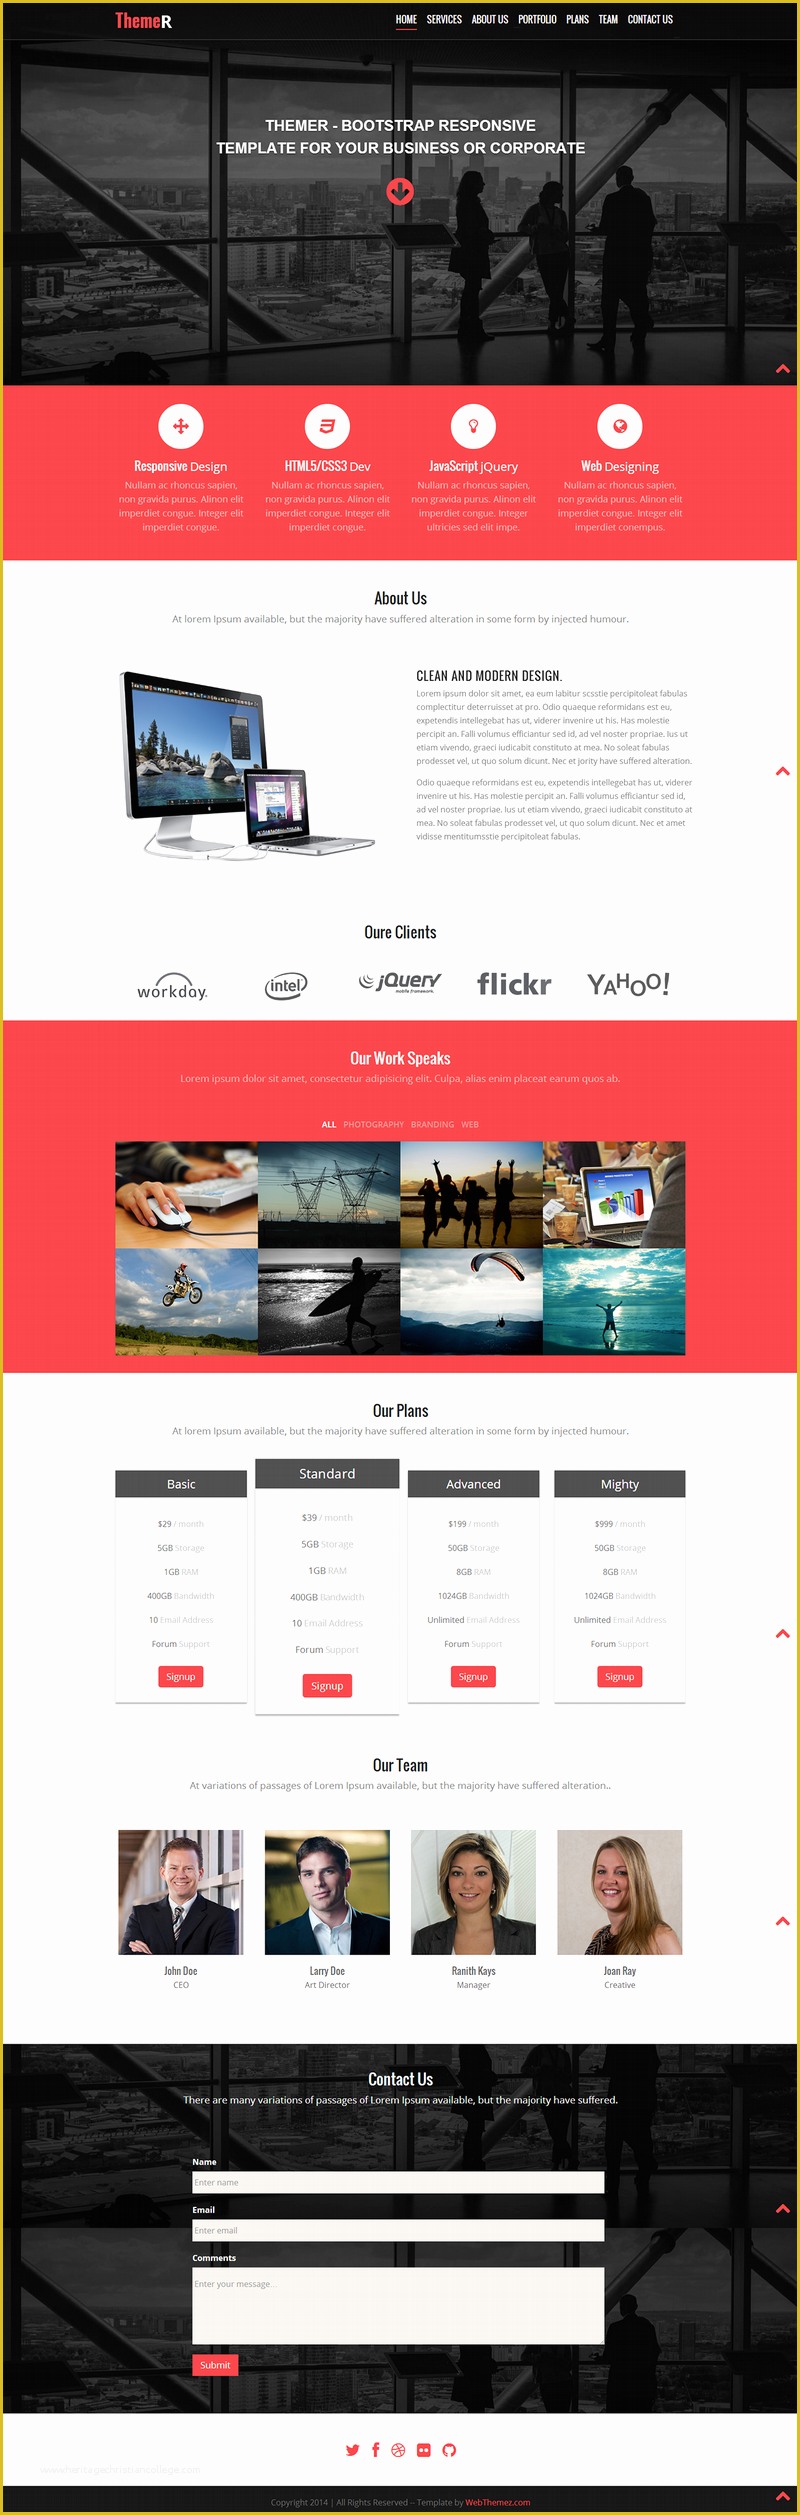 Free HTML Templates Responsive Of 10 Best Free Website HTML5 Templates – August 2014